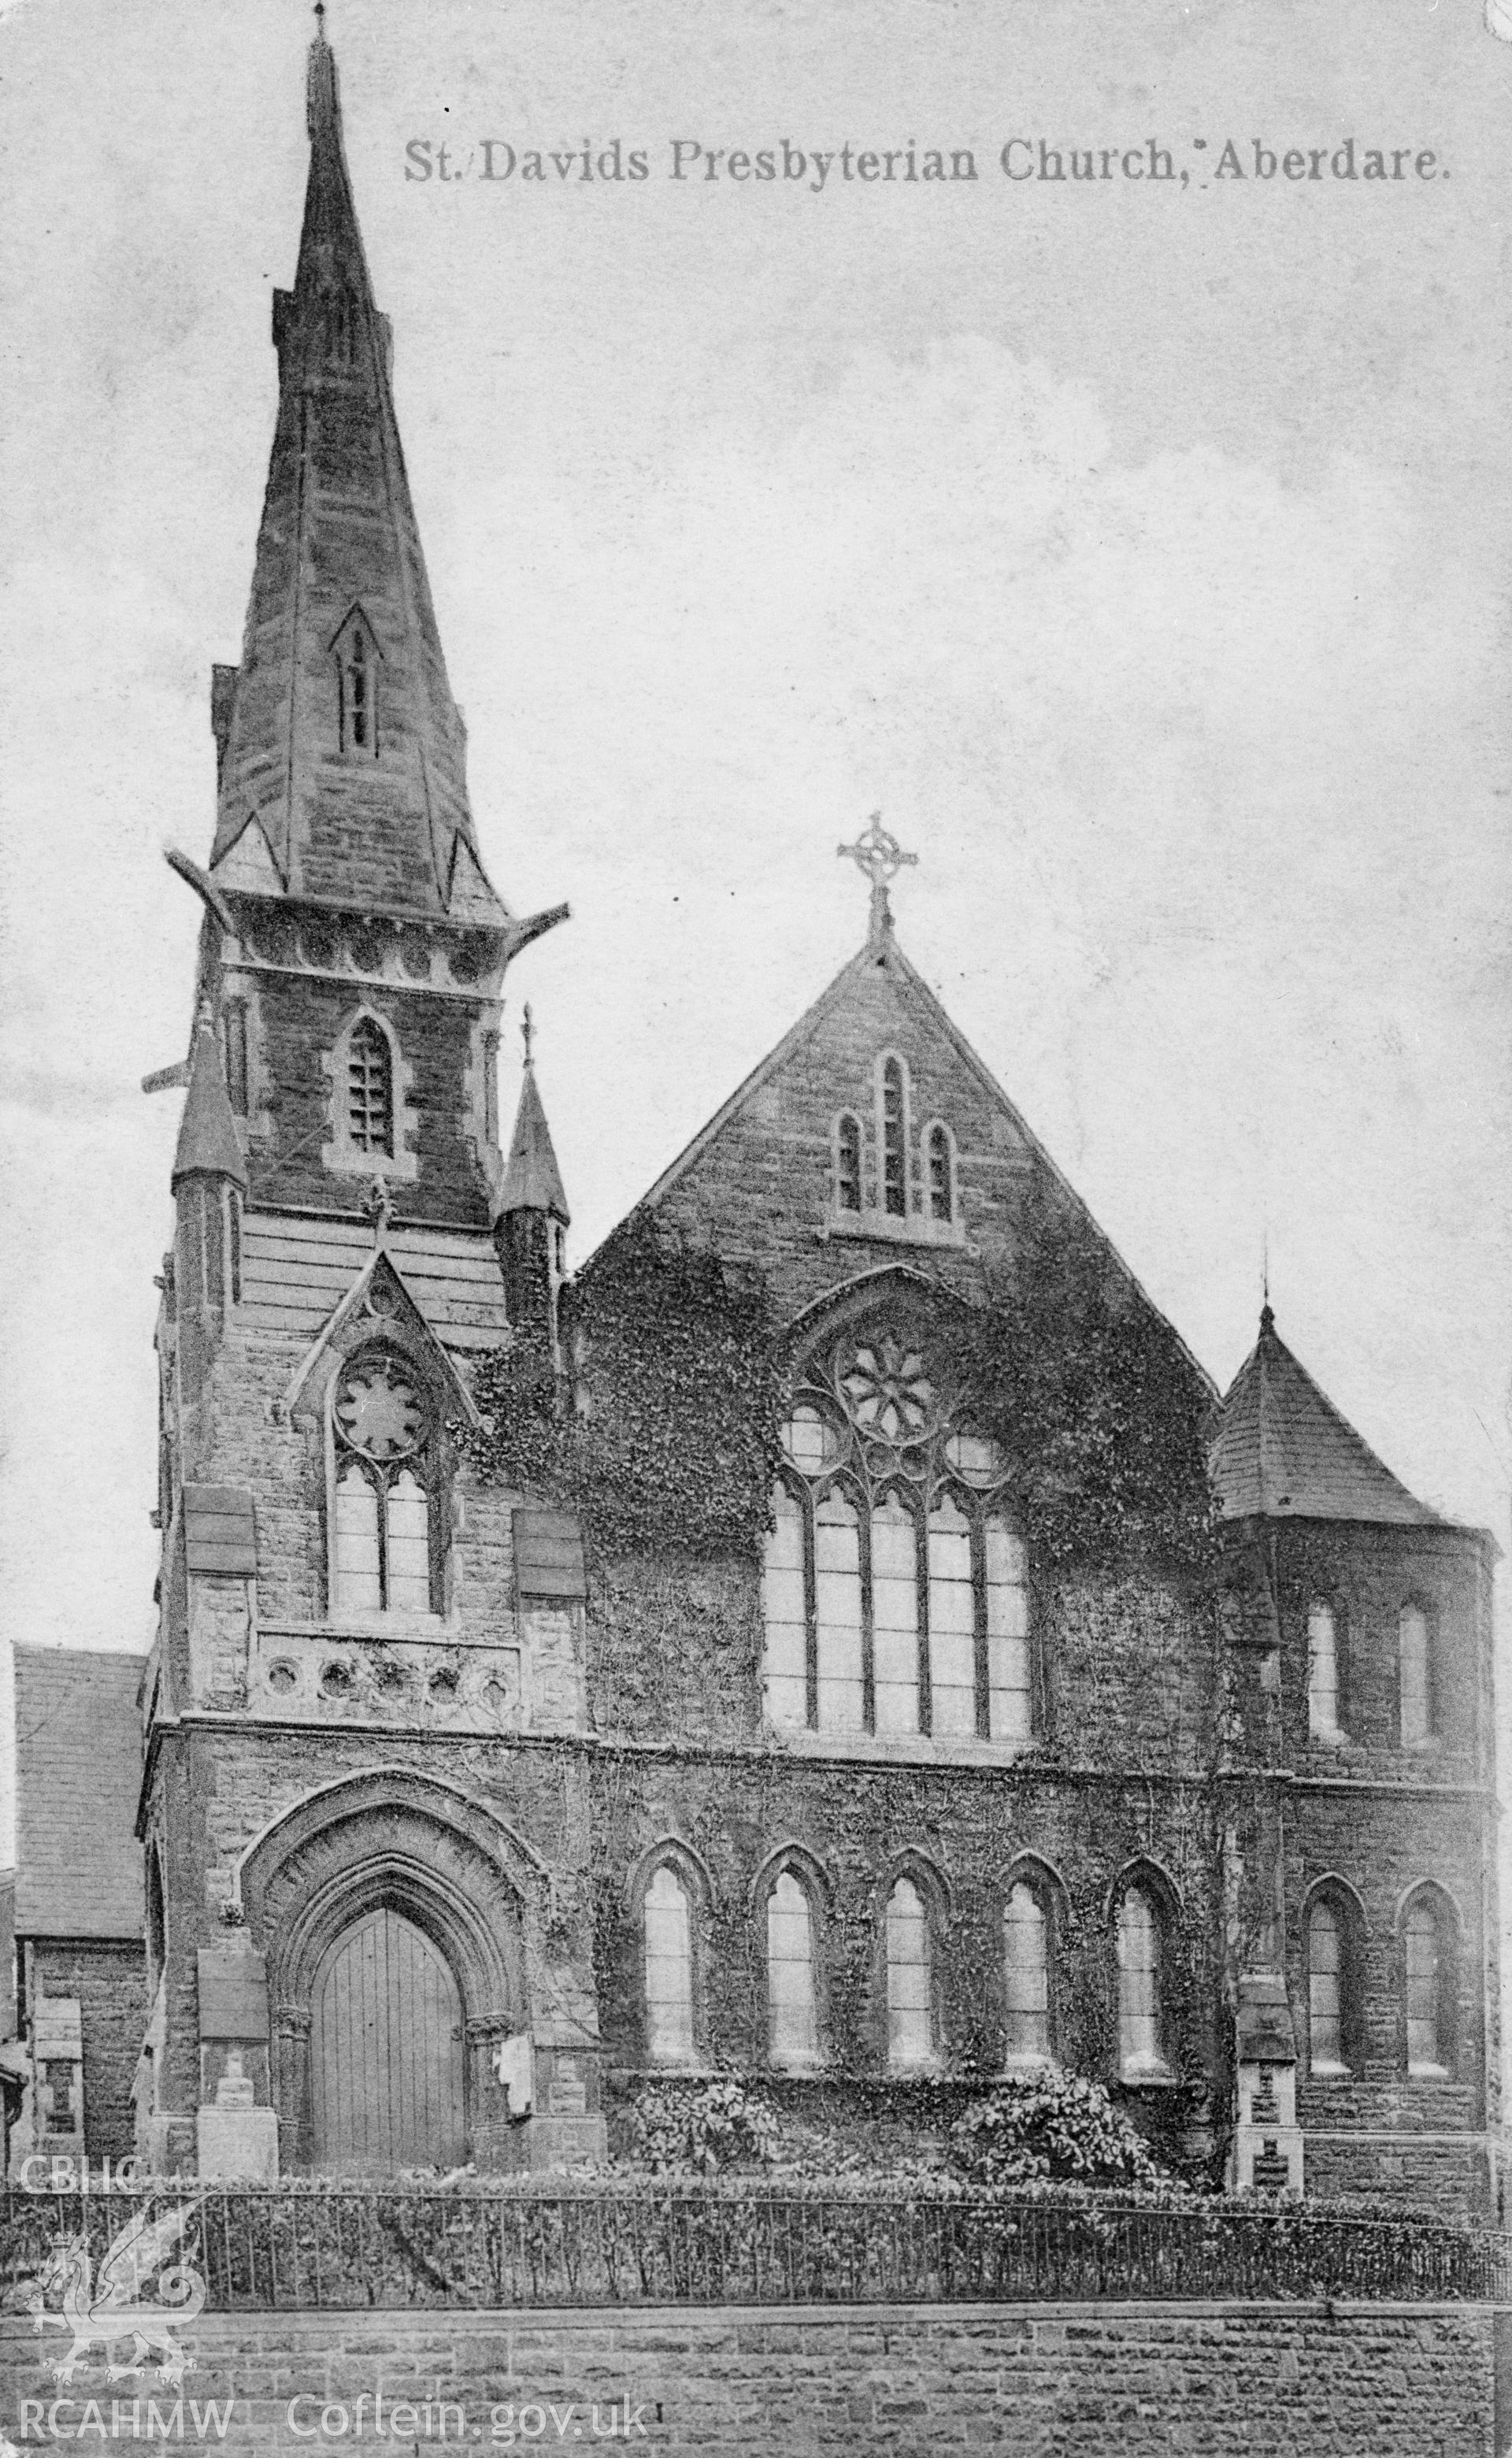 Black and white photograph of St David's Presbyterian Church, Aberdare copied from a postcard dated 1 November 1909, published by WHS & S, Derwen Series, loaned for copying by Thomas Lloyd.